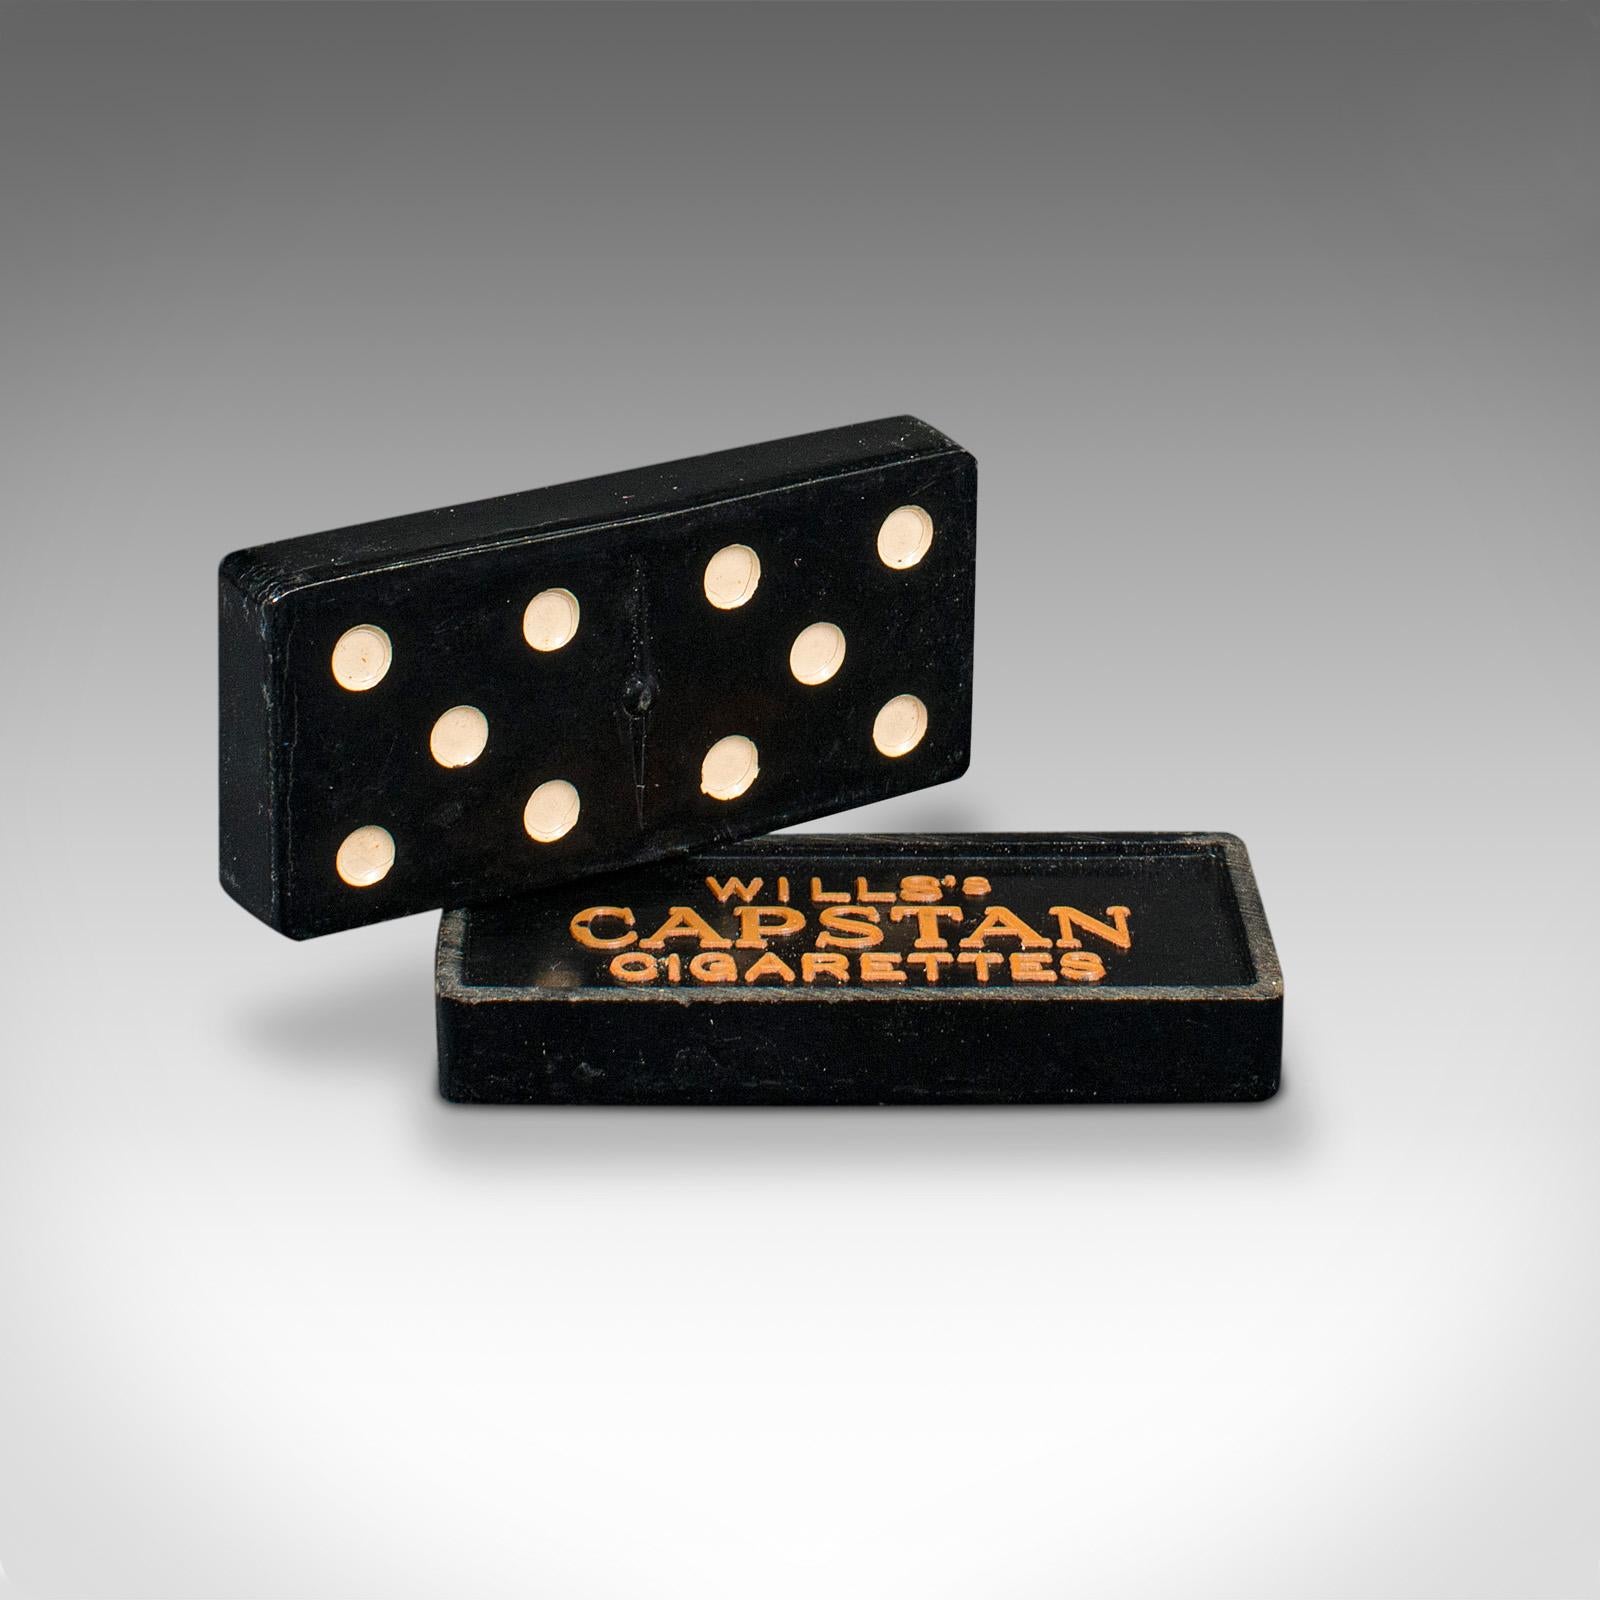 This is a vintage dominoes set. An English, bakelite game in a tin carry case, dating to the mid 20th century, circa 1940.

An enduring favourite, with wonderful period appeal
Displays a desirable aged patina throughout
28 bakelite pieces with